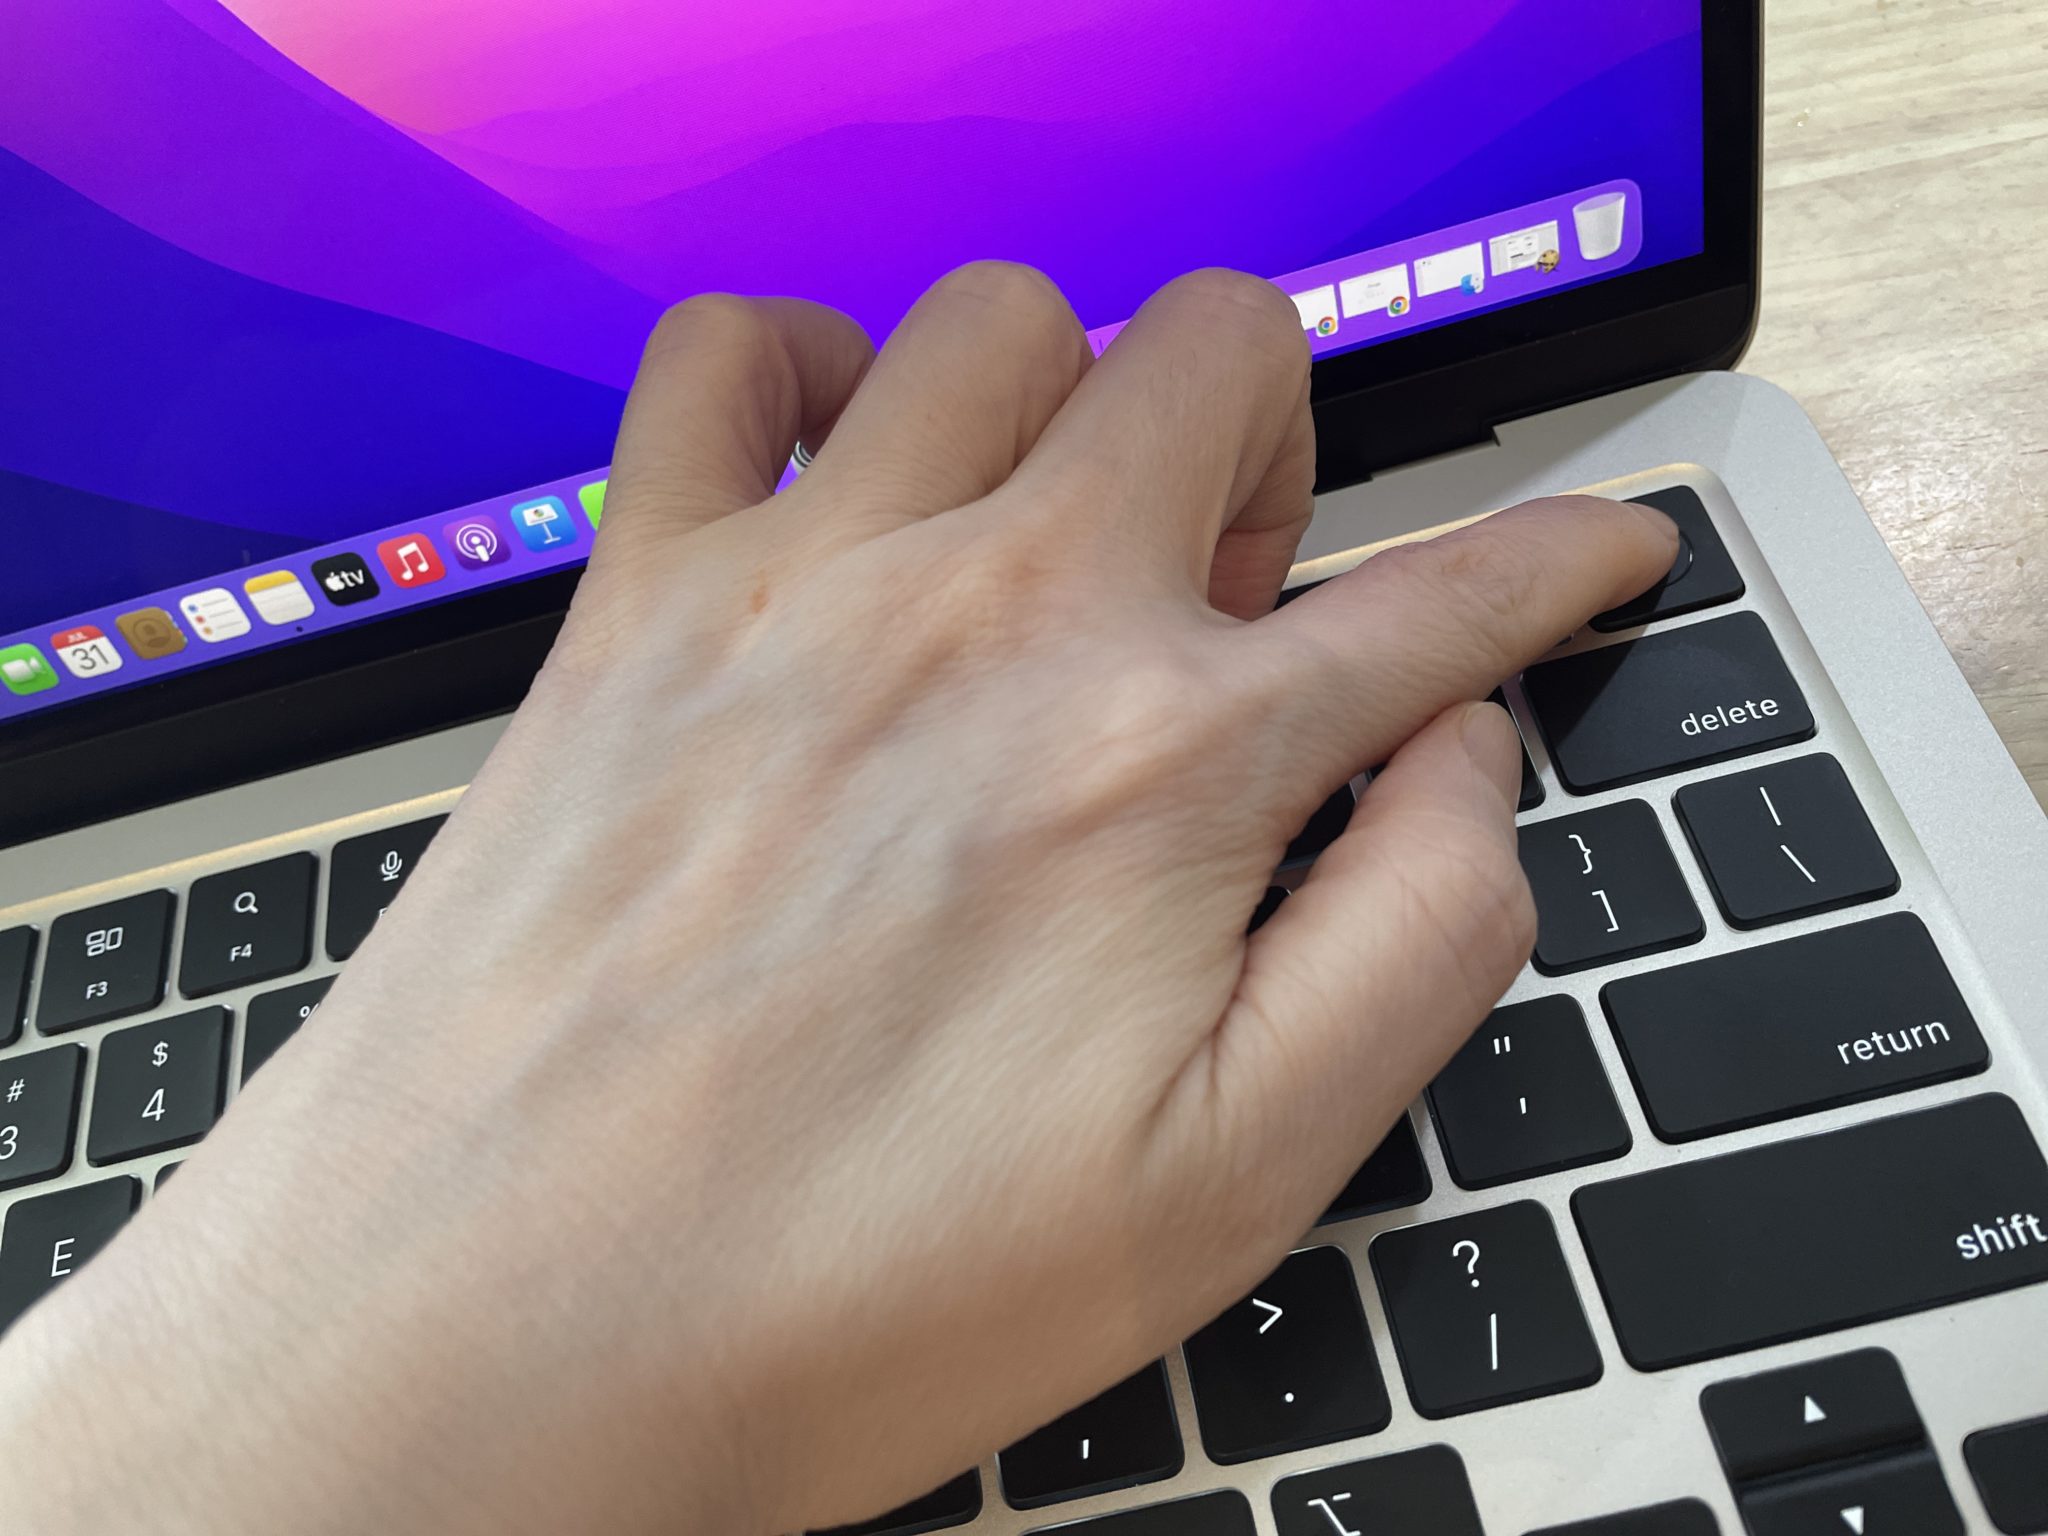 how to reset macbook air password when locked out